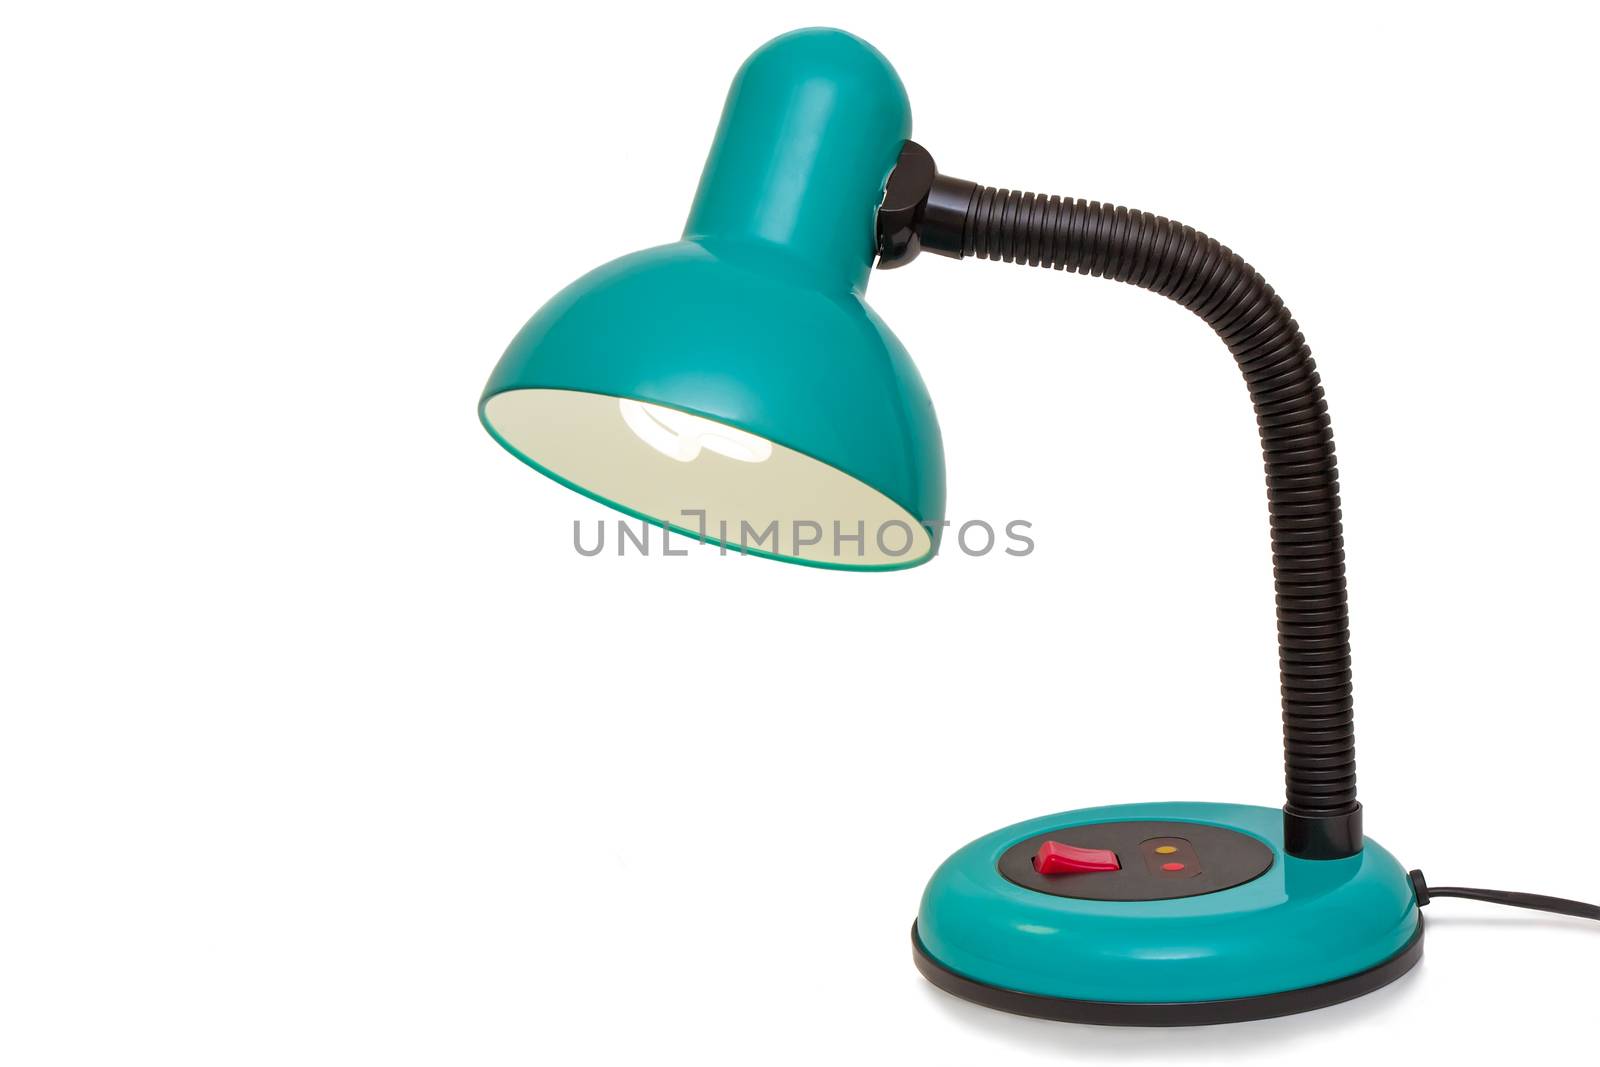 Table lamp with green metal shade and a flexible tripod. Presented on a white background.